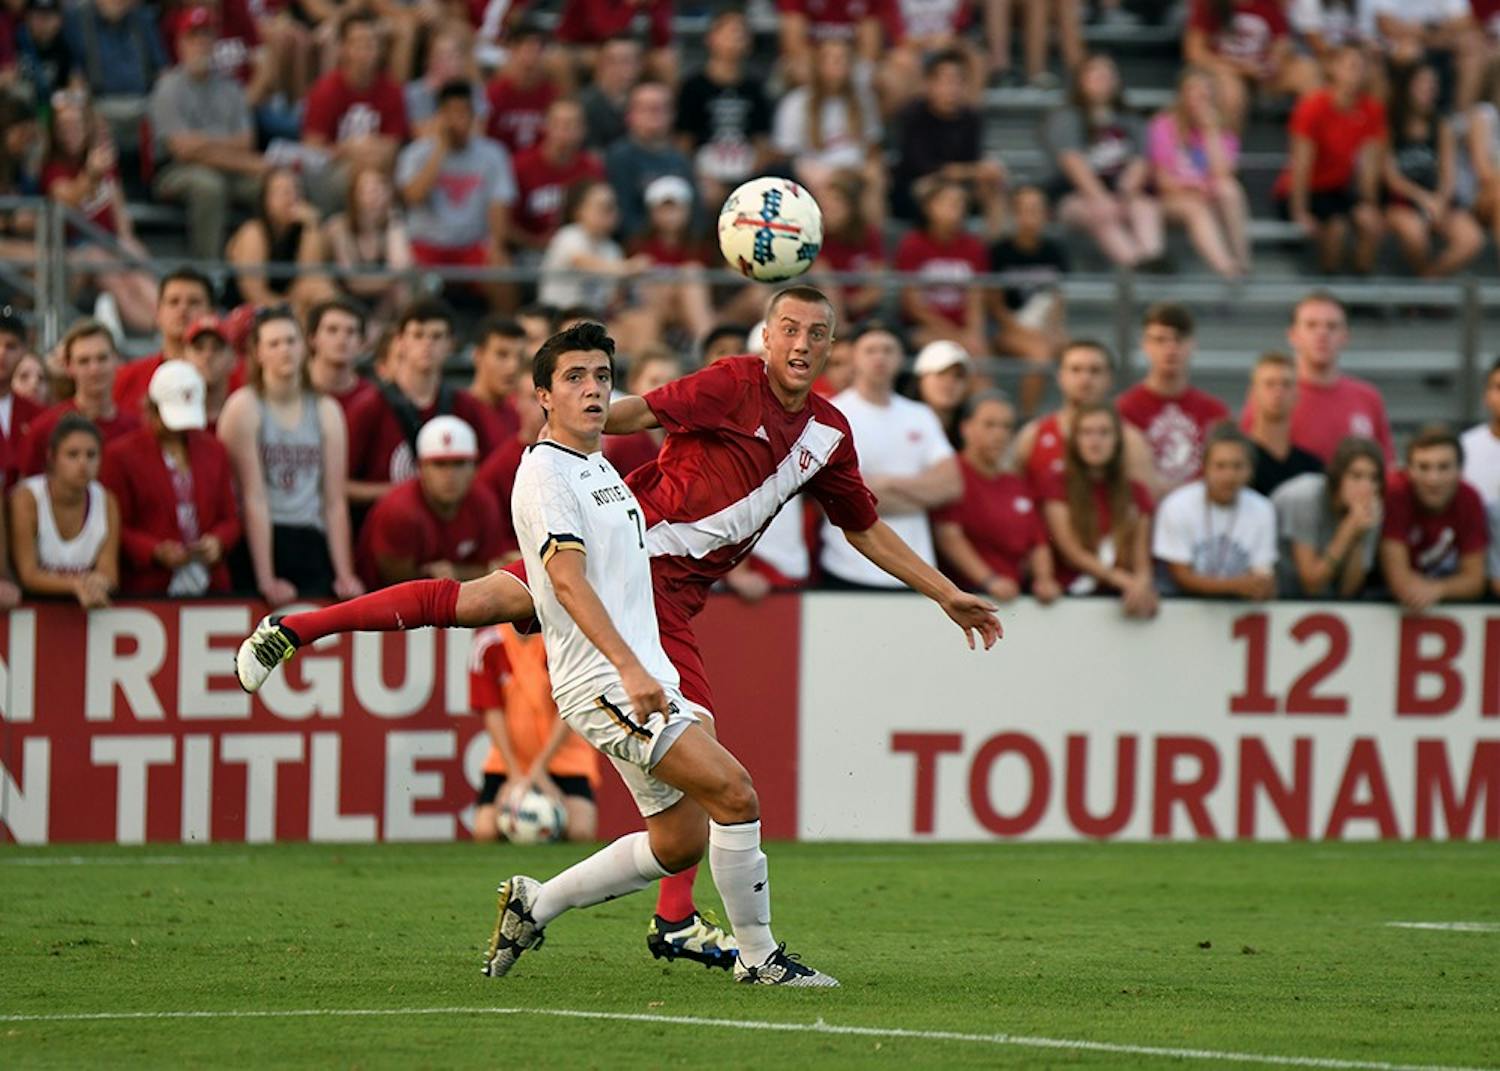 Freshman midfielder Griffin Dorsey looks on after kicking the ball against Notre Dame on Tuesday at Bill Armstrong Stadium. Dorsey has been an impressive part of IU's freshman class this season.&nbsp;